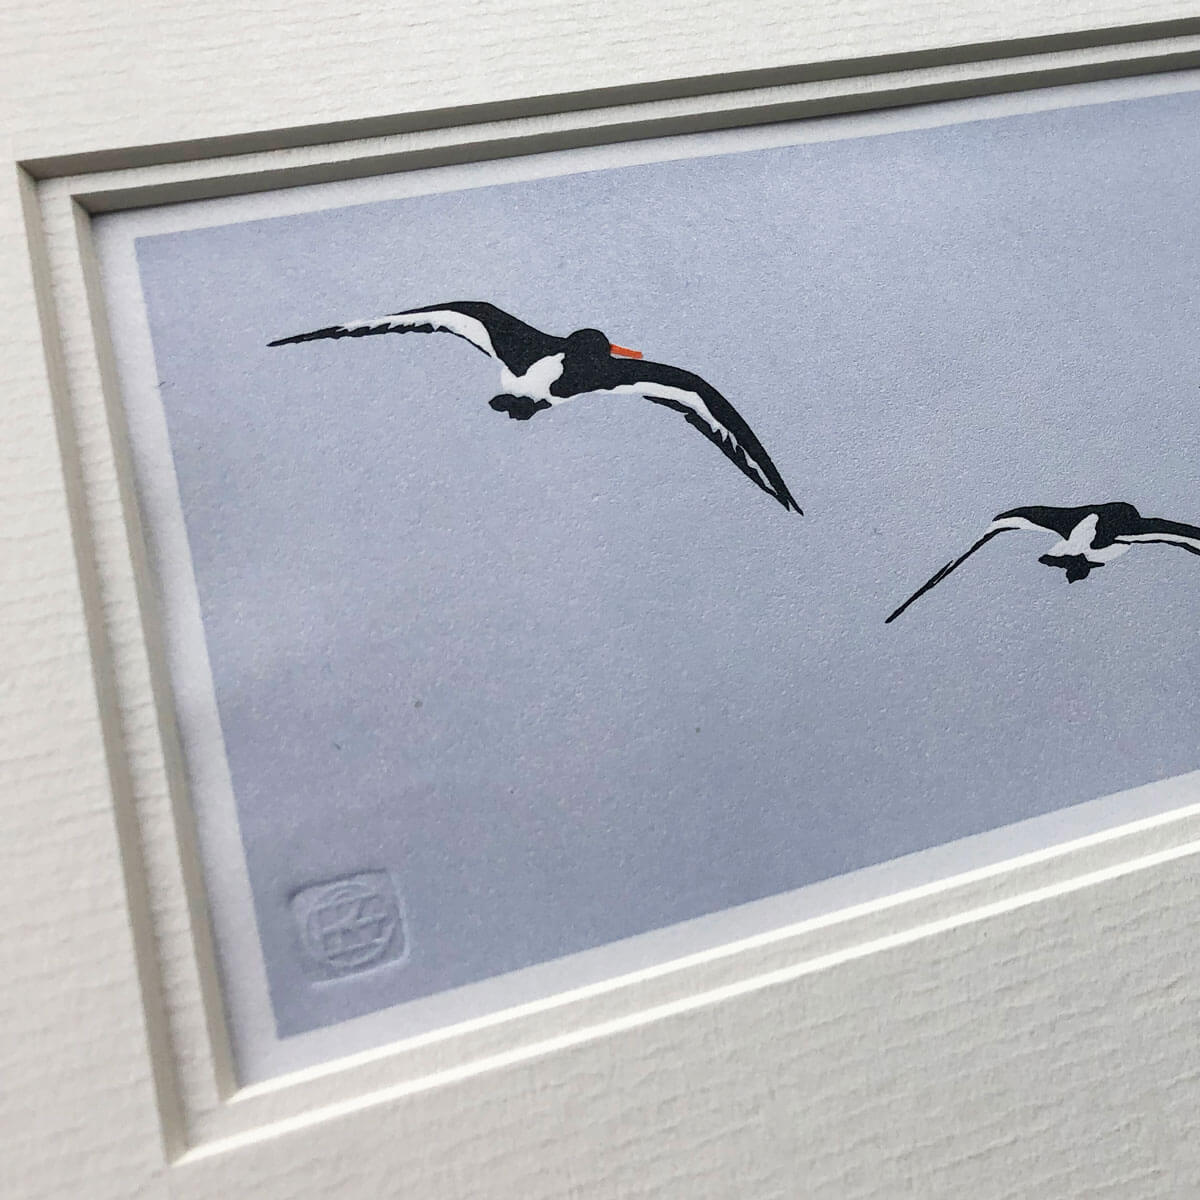 handmade linocut print of black and white oyster catcher birds in flight against pale blue sky background